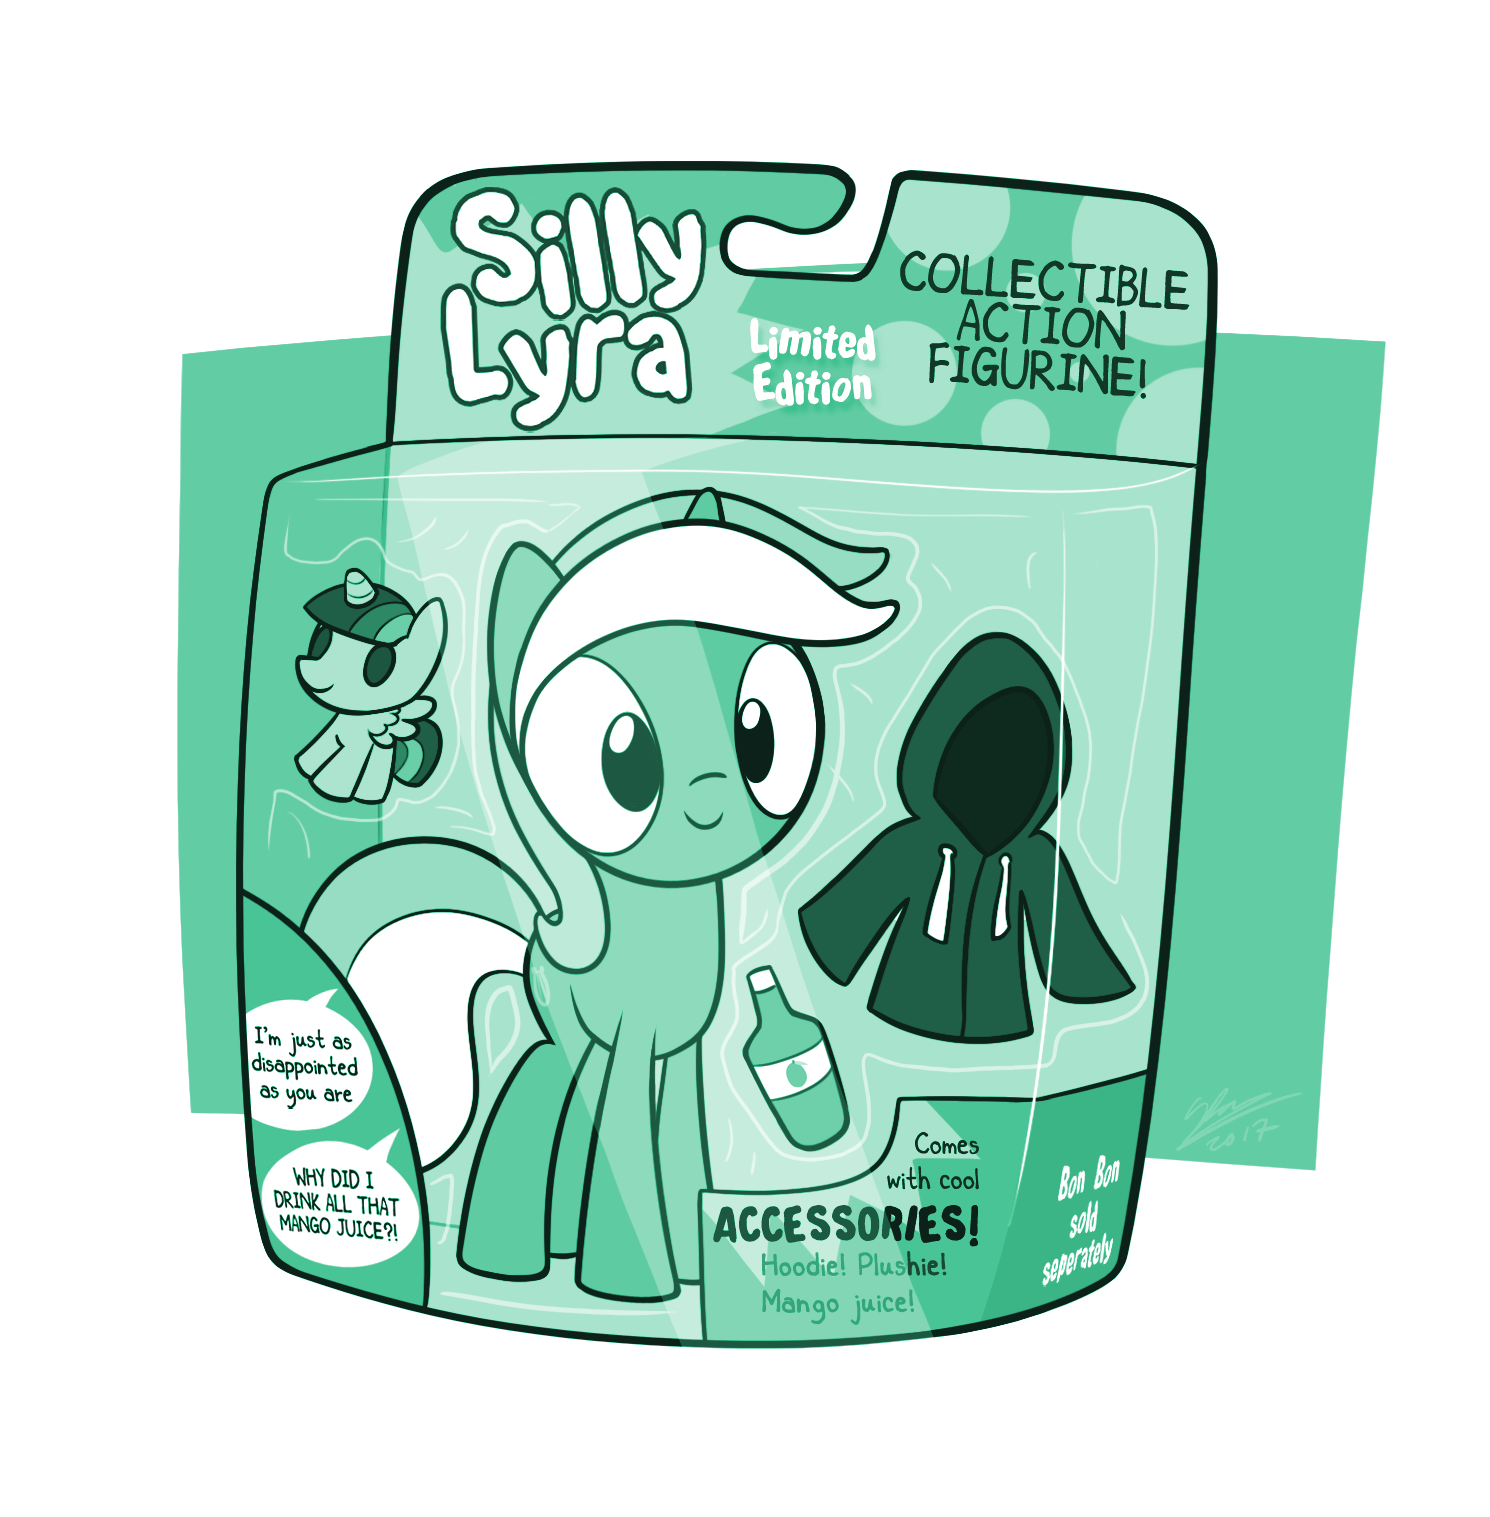 Silly Lyra - Collectible Action Figurine!